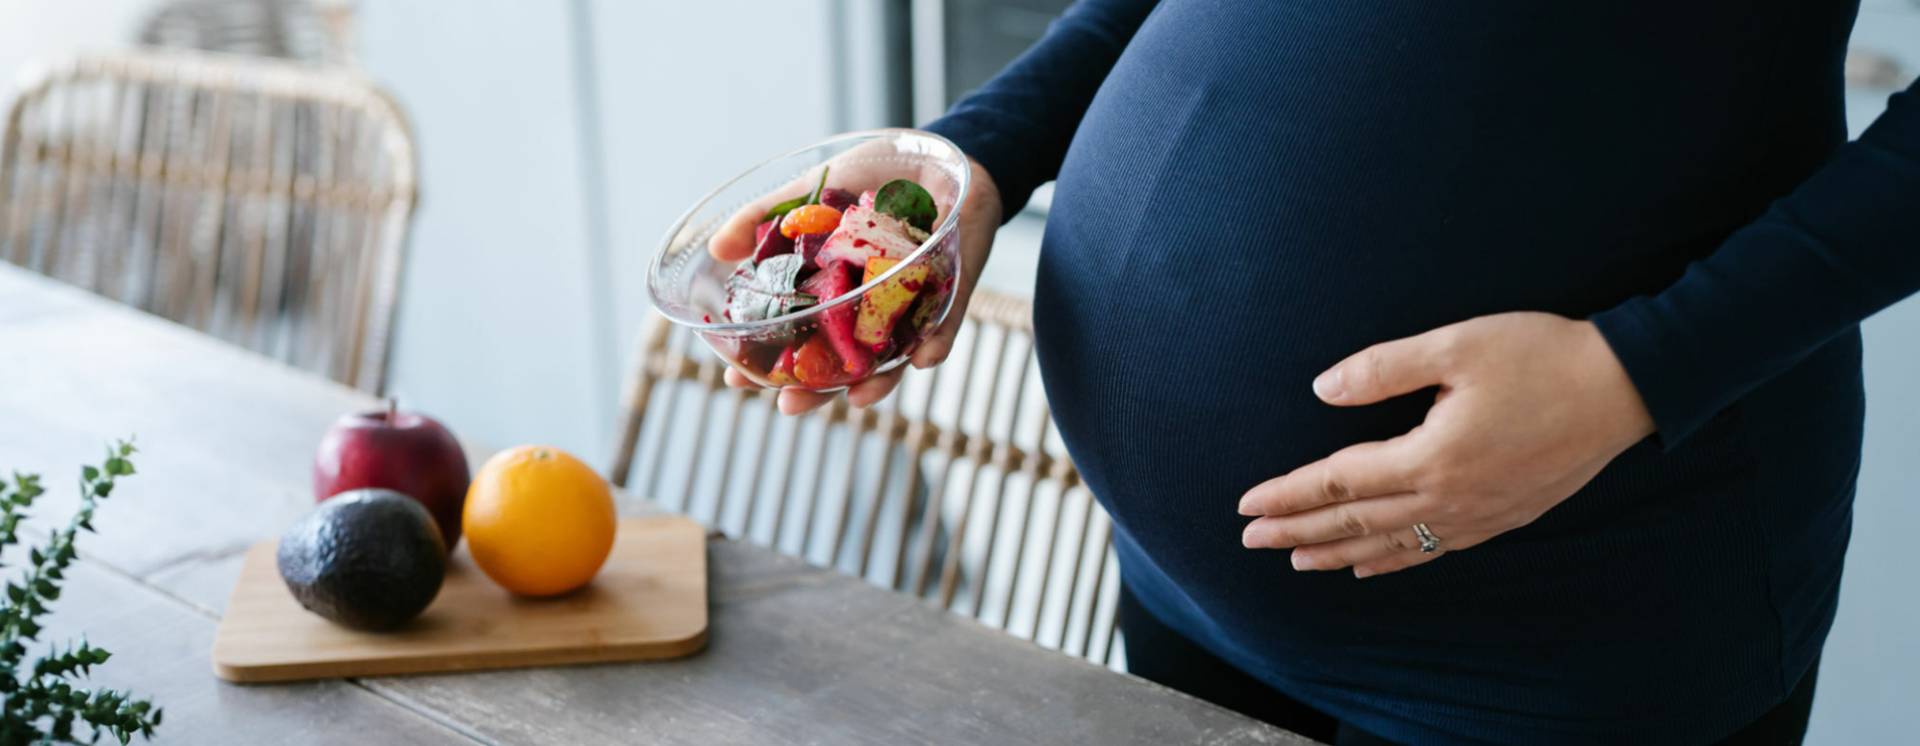 What to eat during pregnancy